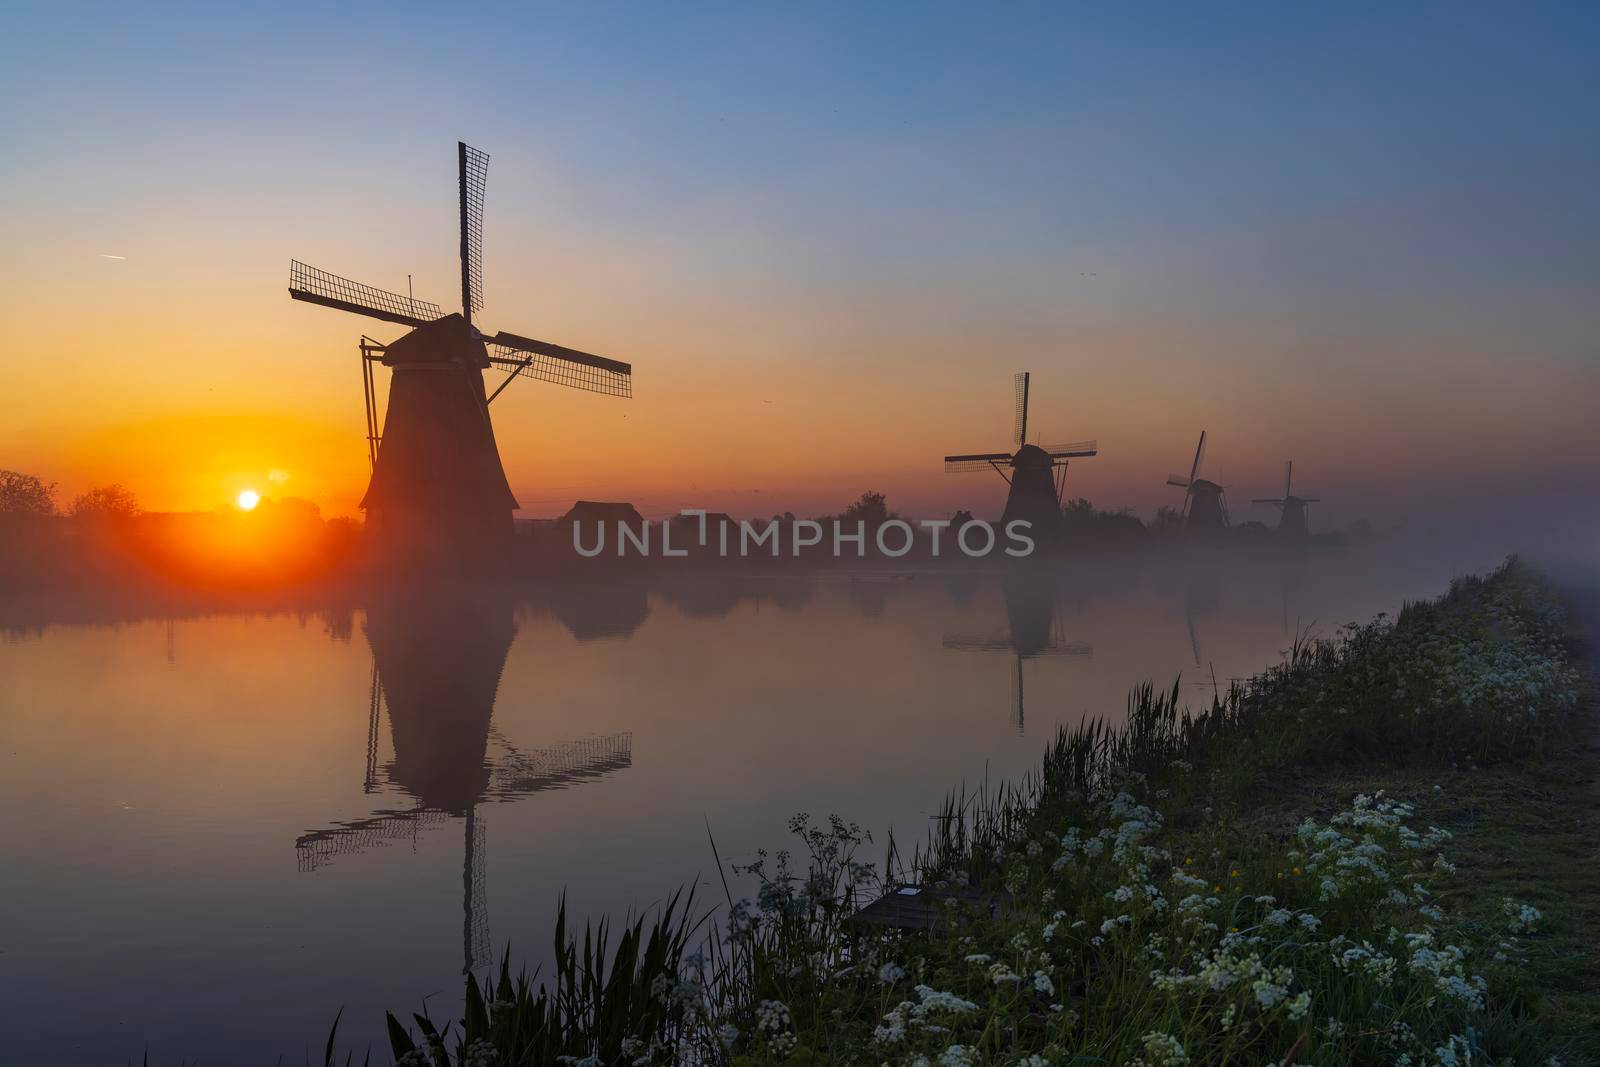 Traditional Dutch windmills with a colourful sky just before sunrise in Kinderdijk, The Netherlands by phbcz